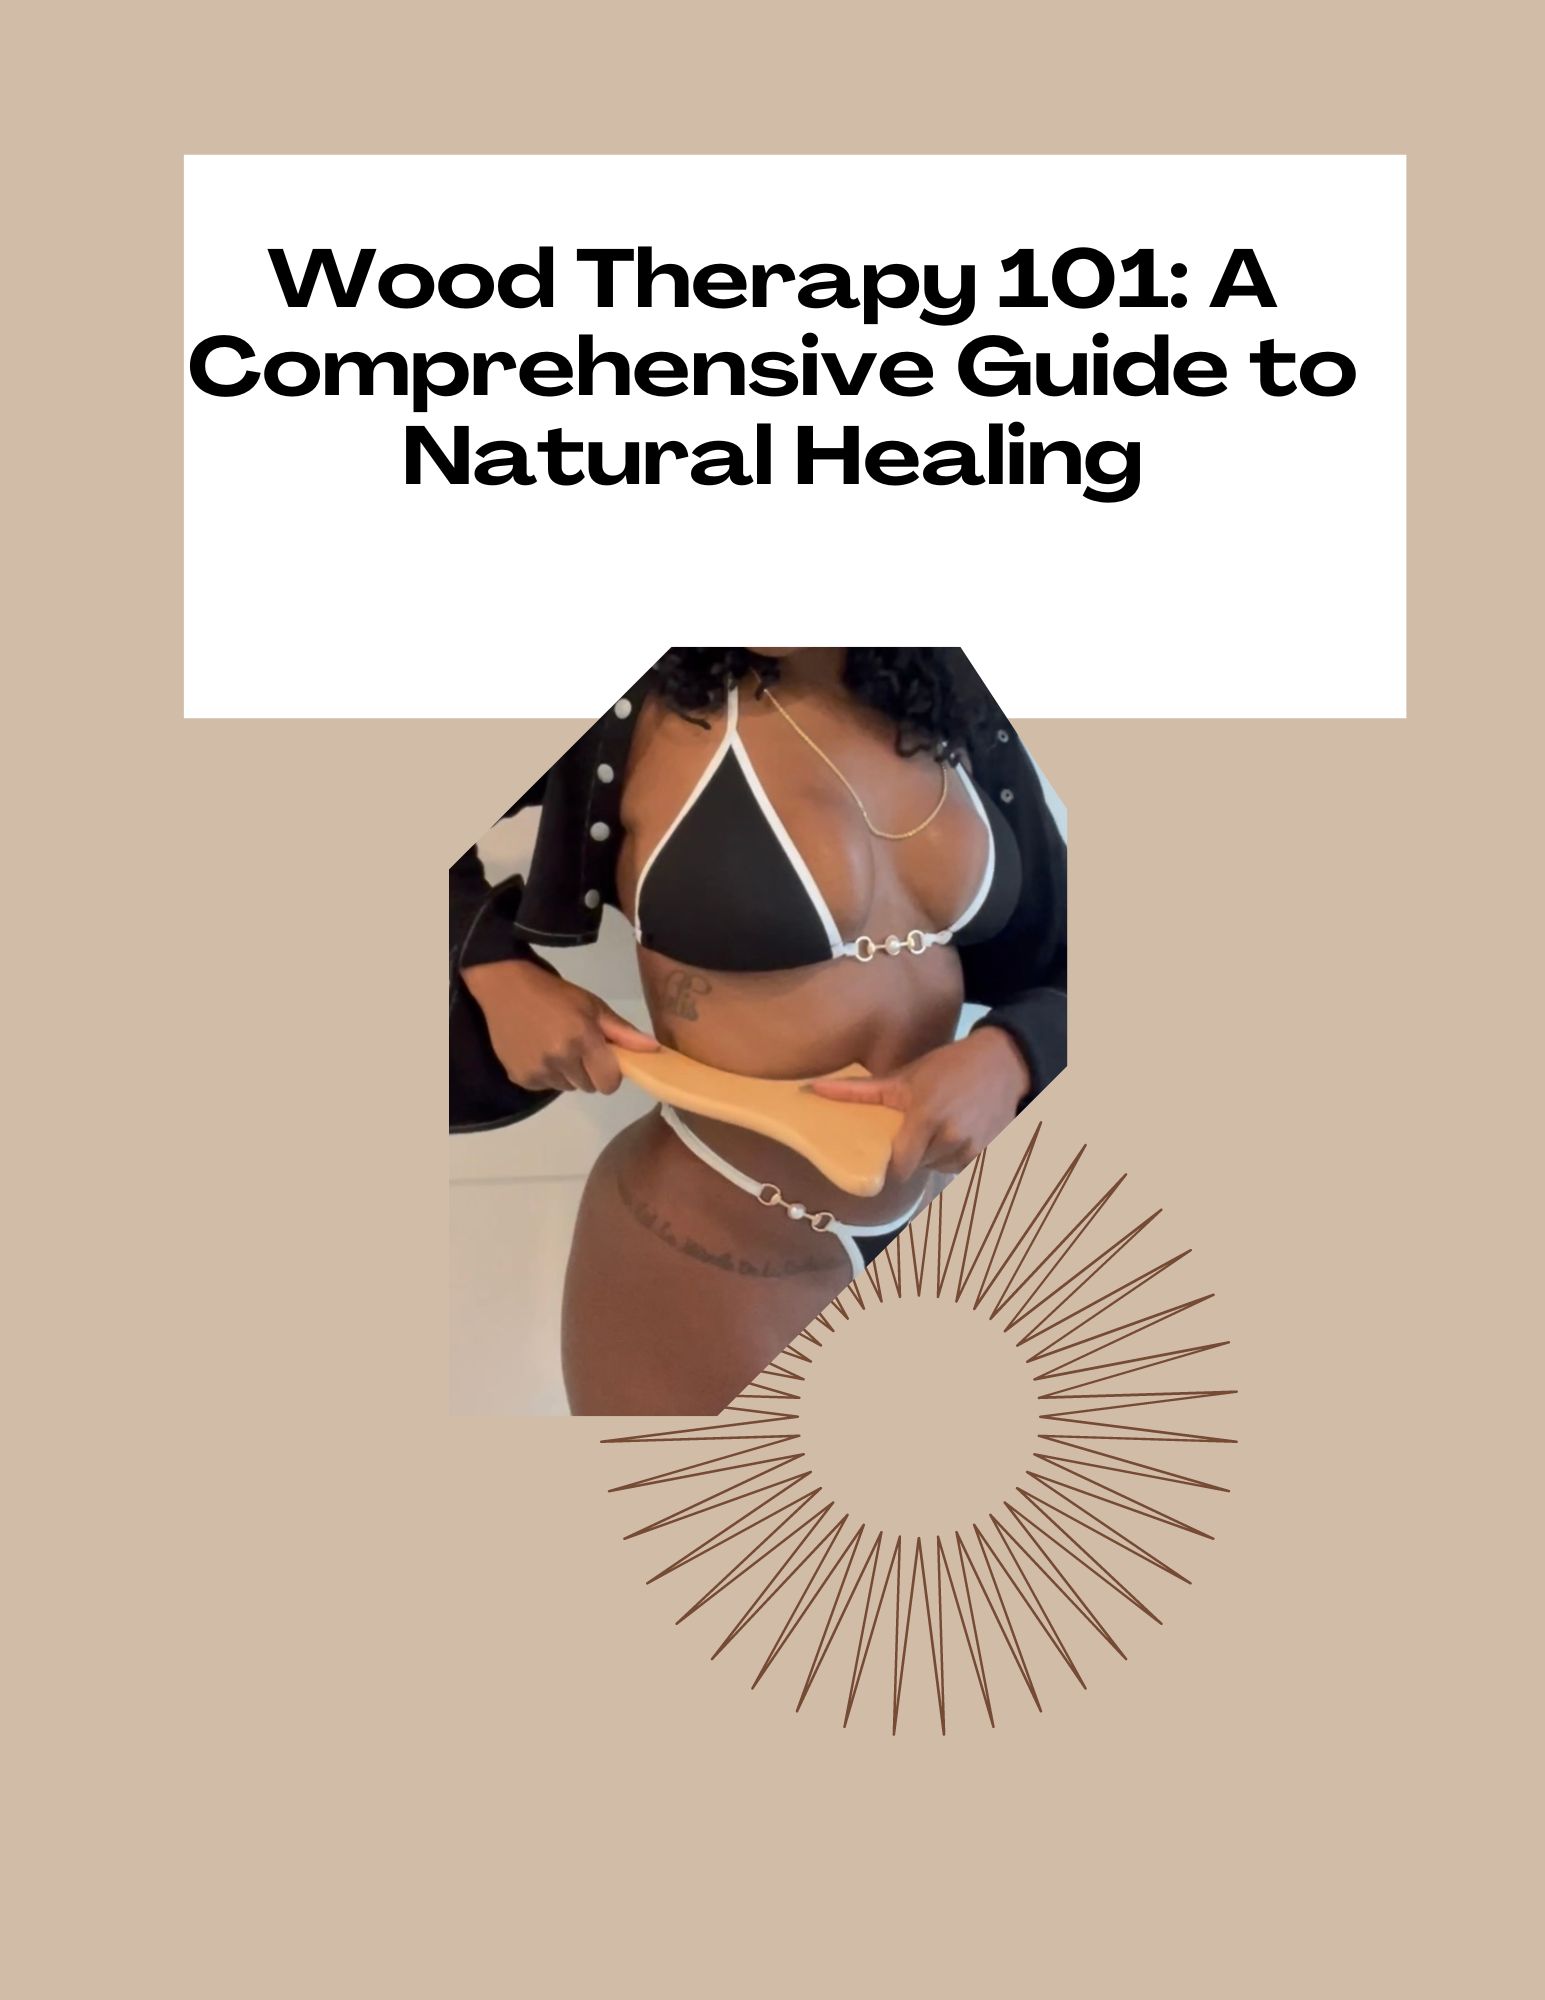 Wood Therapy Guide thumbnail